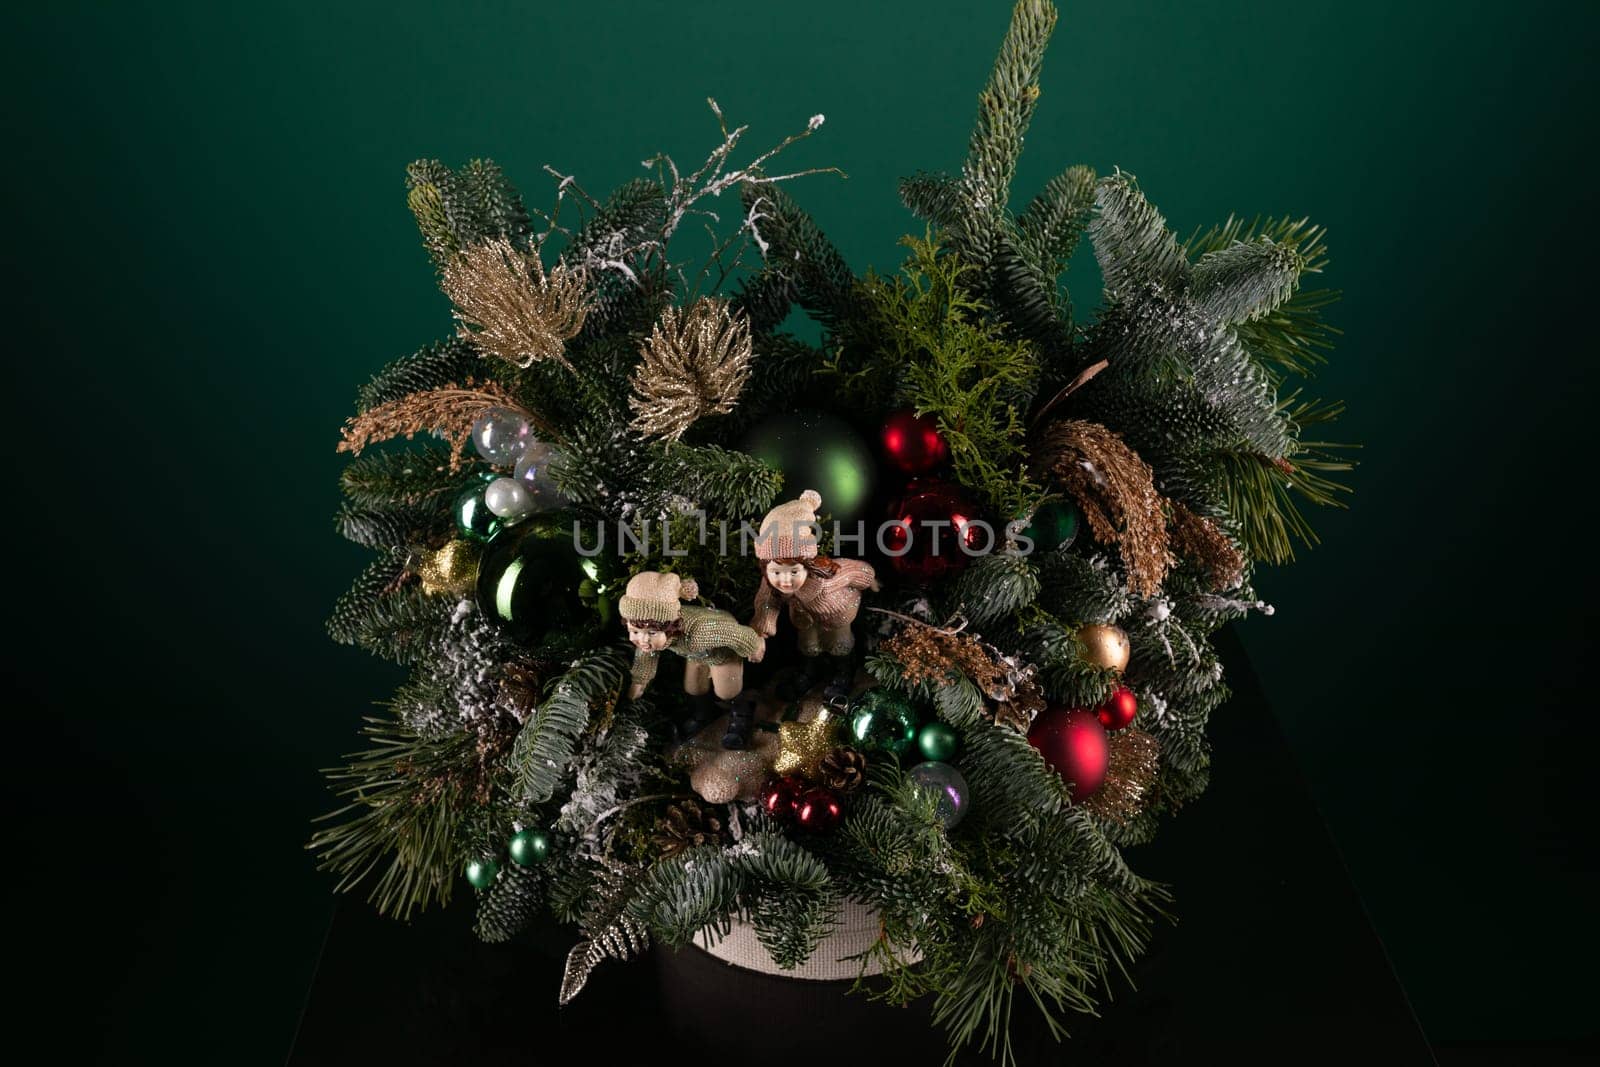 Potted Plant Adorned With Christmas Decorations by TRMK